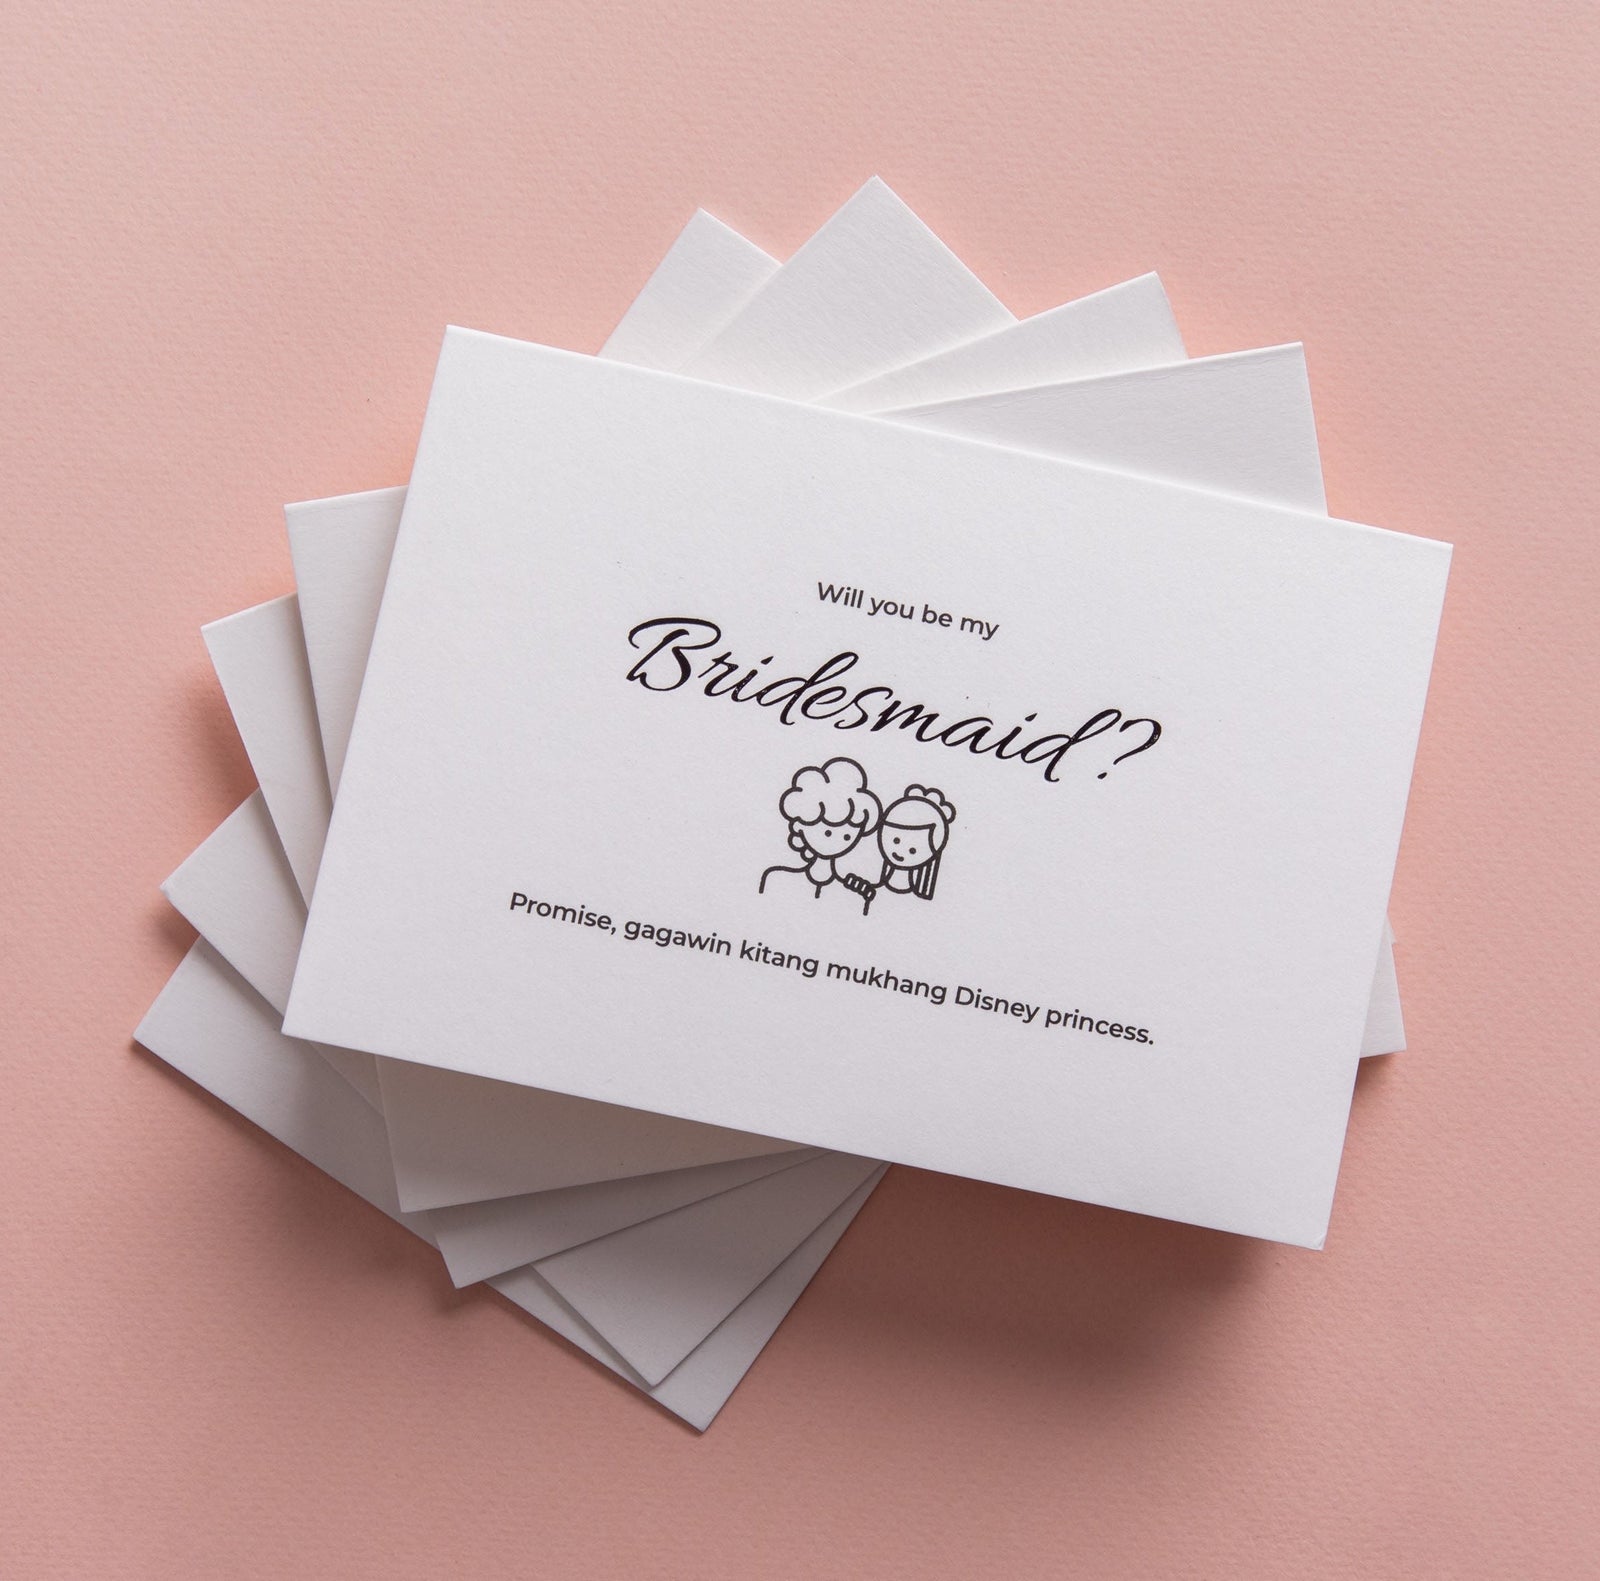 "Will you be my bridesmaid?" Cards